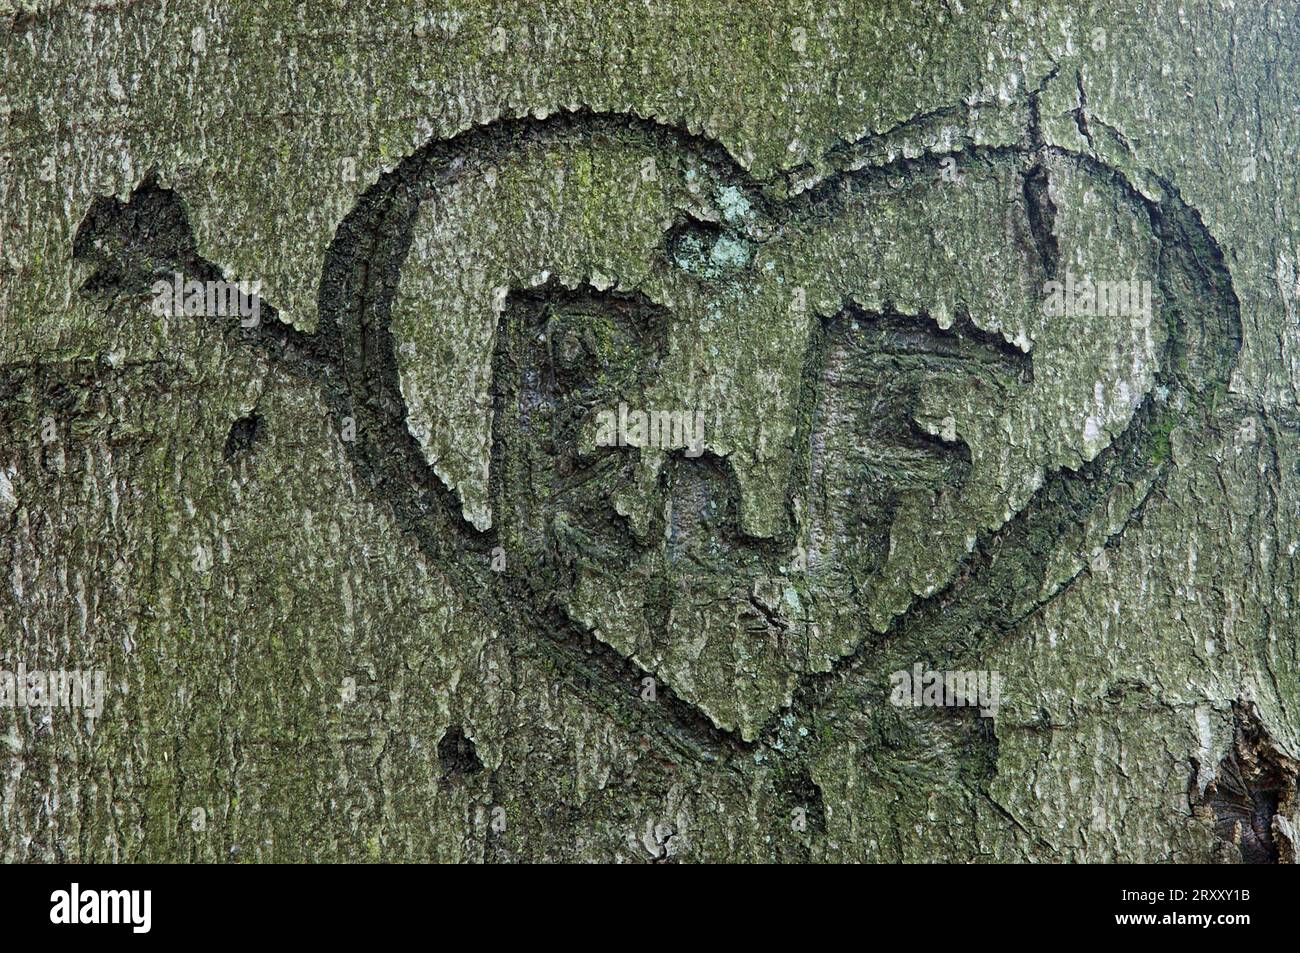 Heart carved into beech trunk, common beech (Fagus sylvatica), Germany Stock Photo